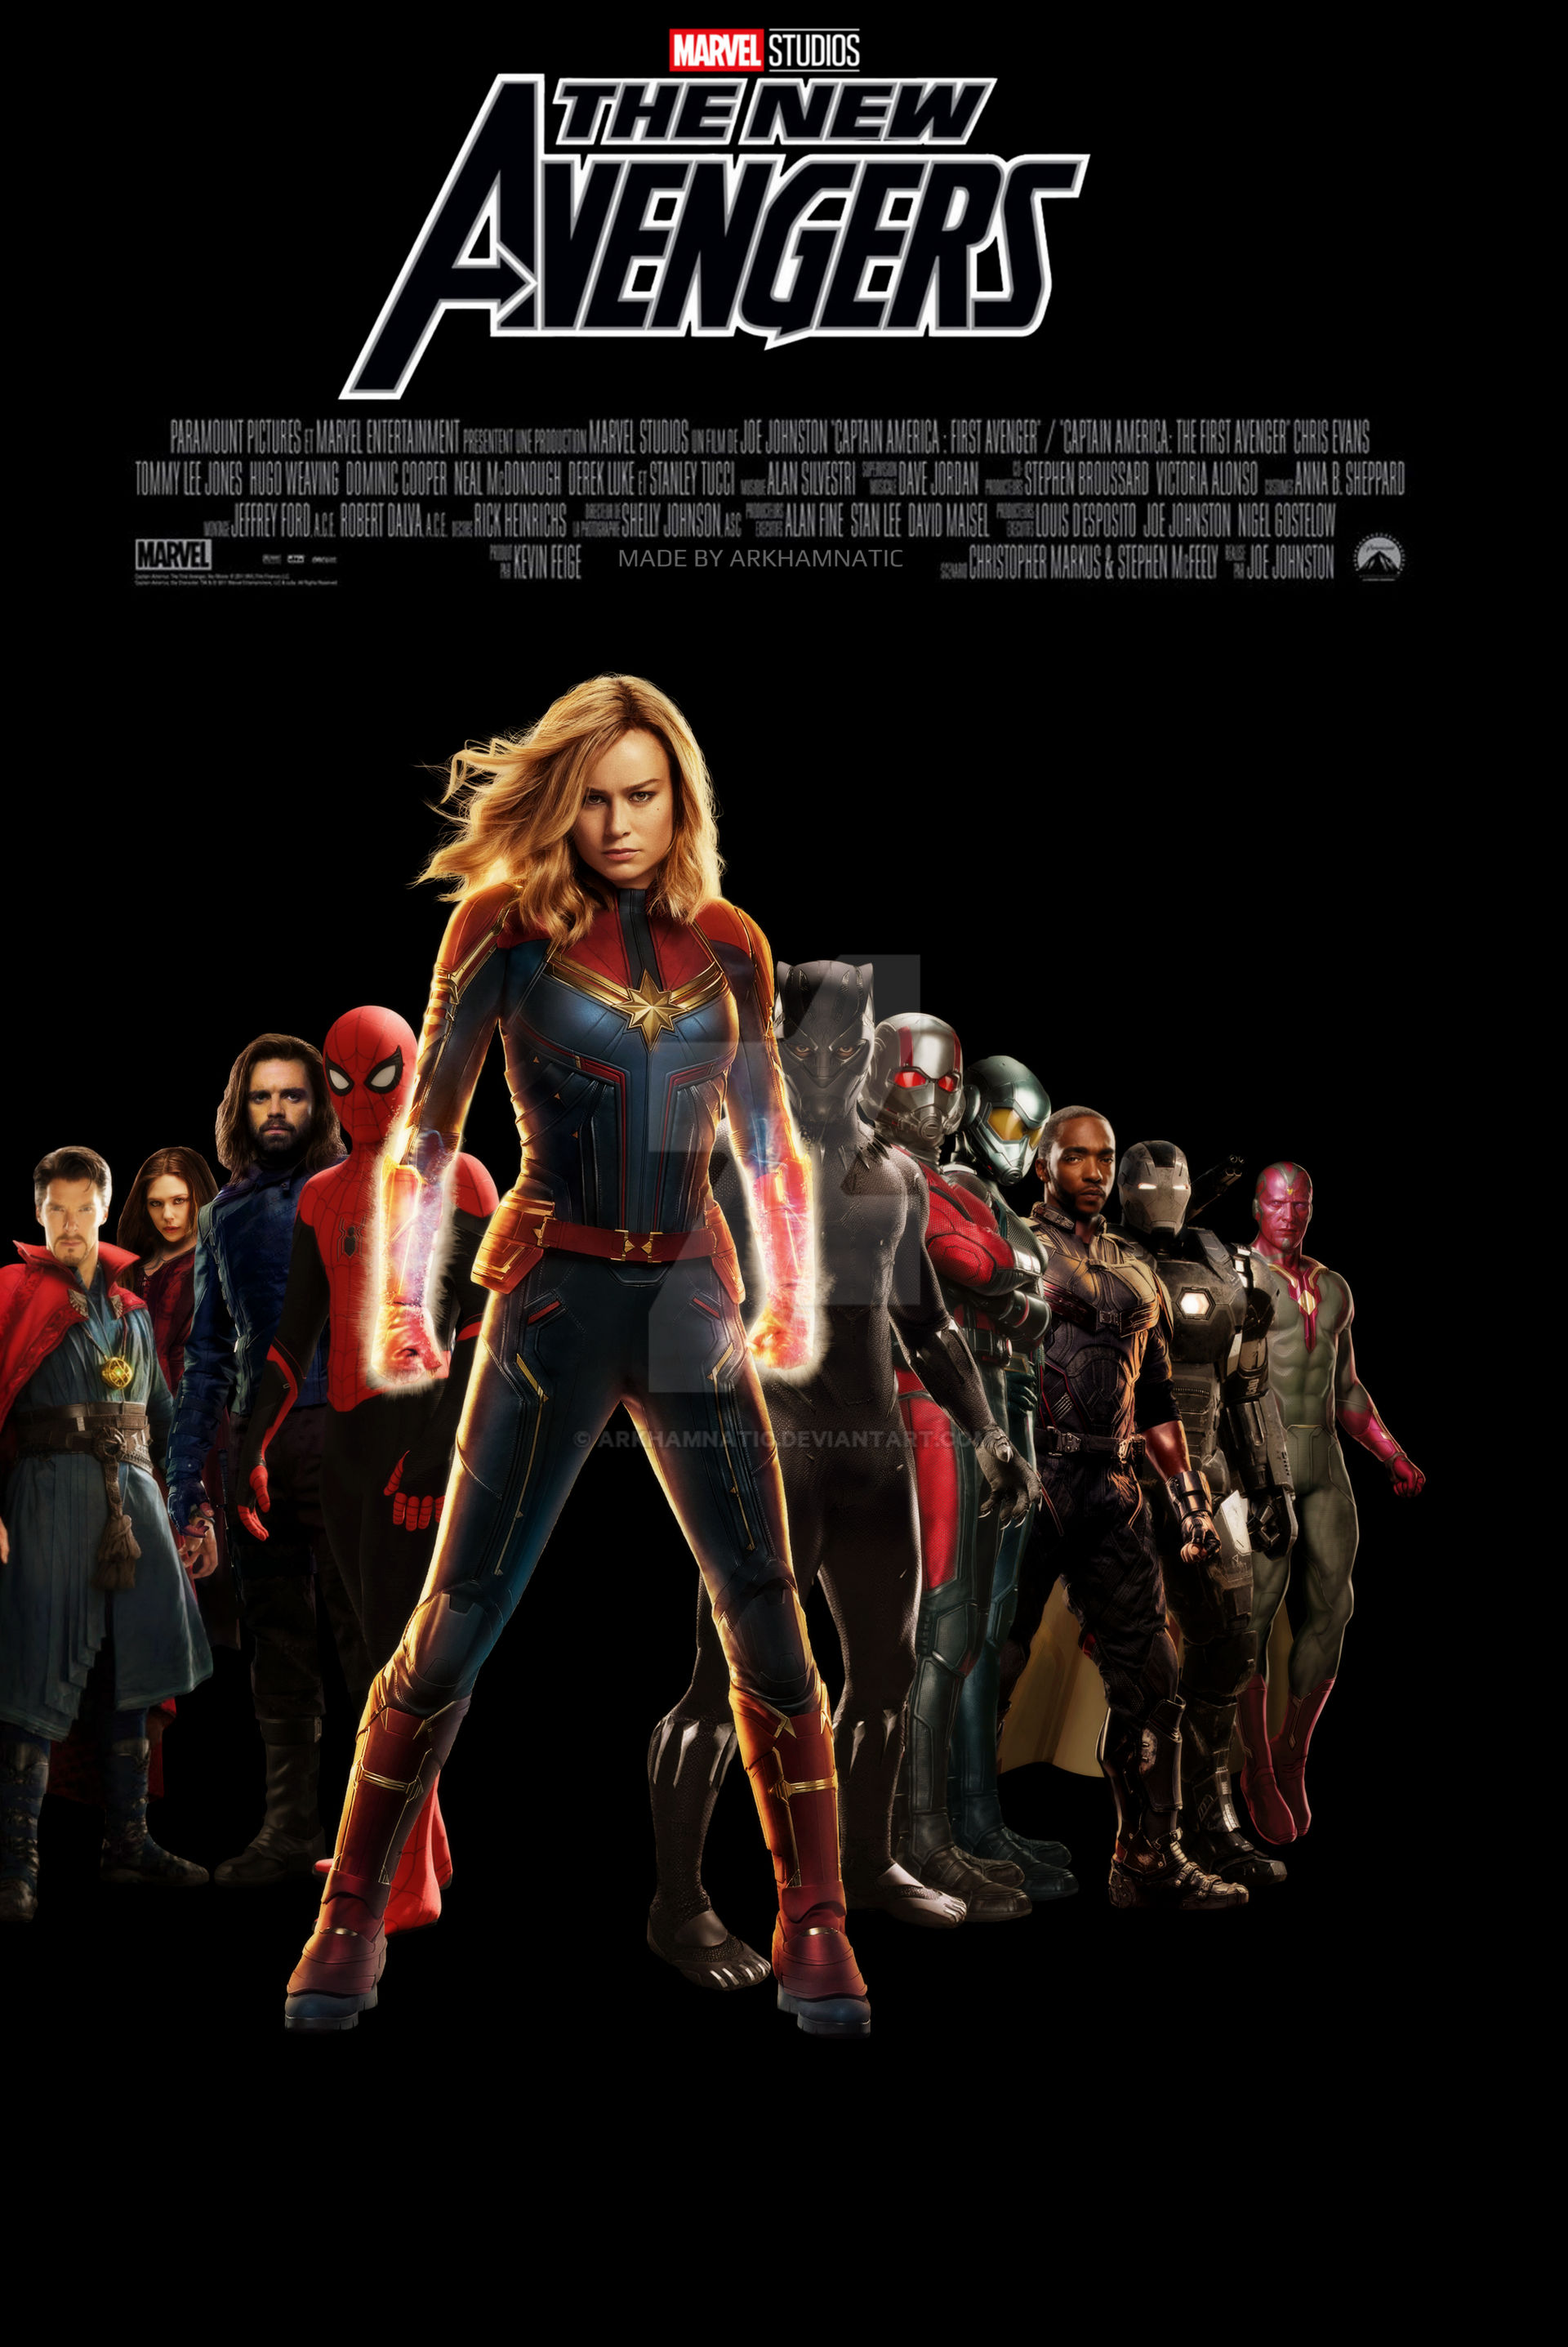 Marvel's The New Avengers movie poster by ArkhamNatic on